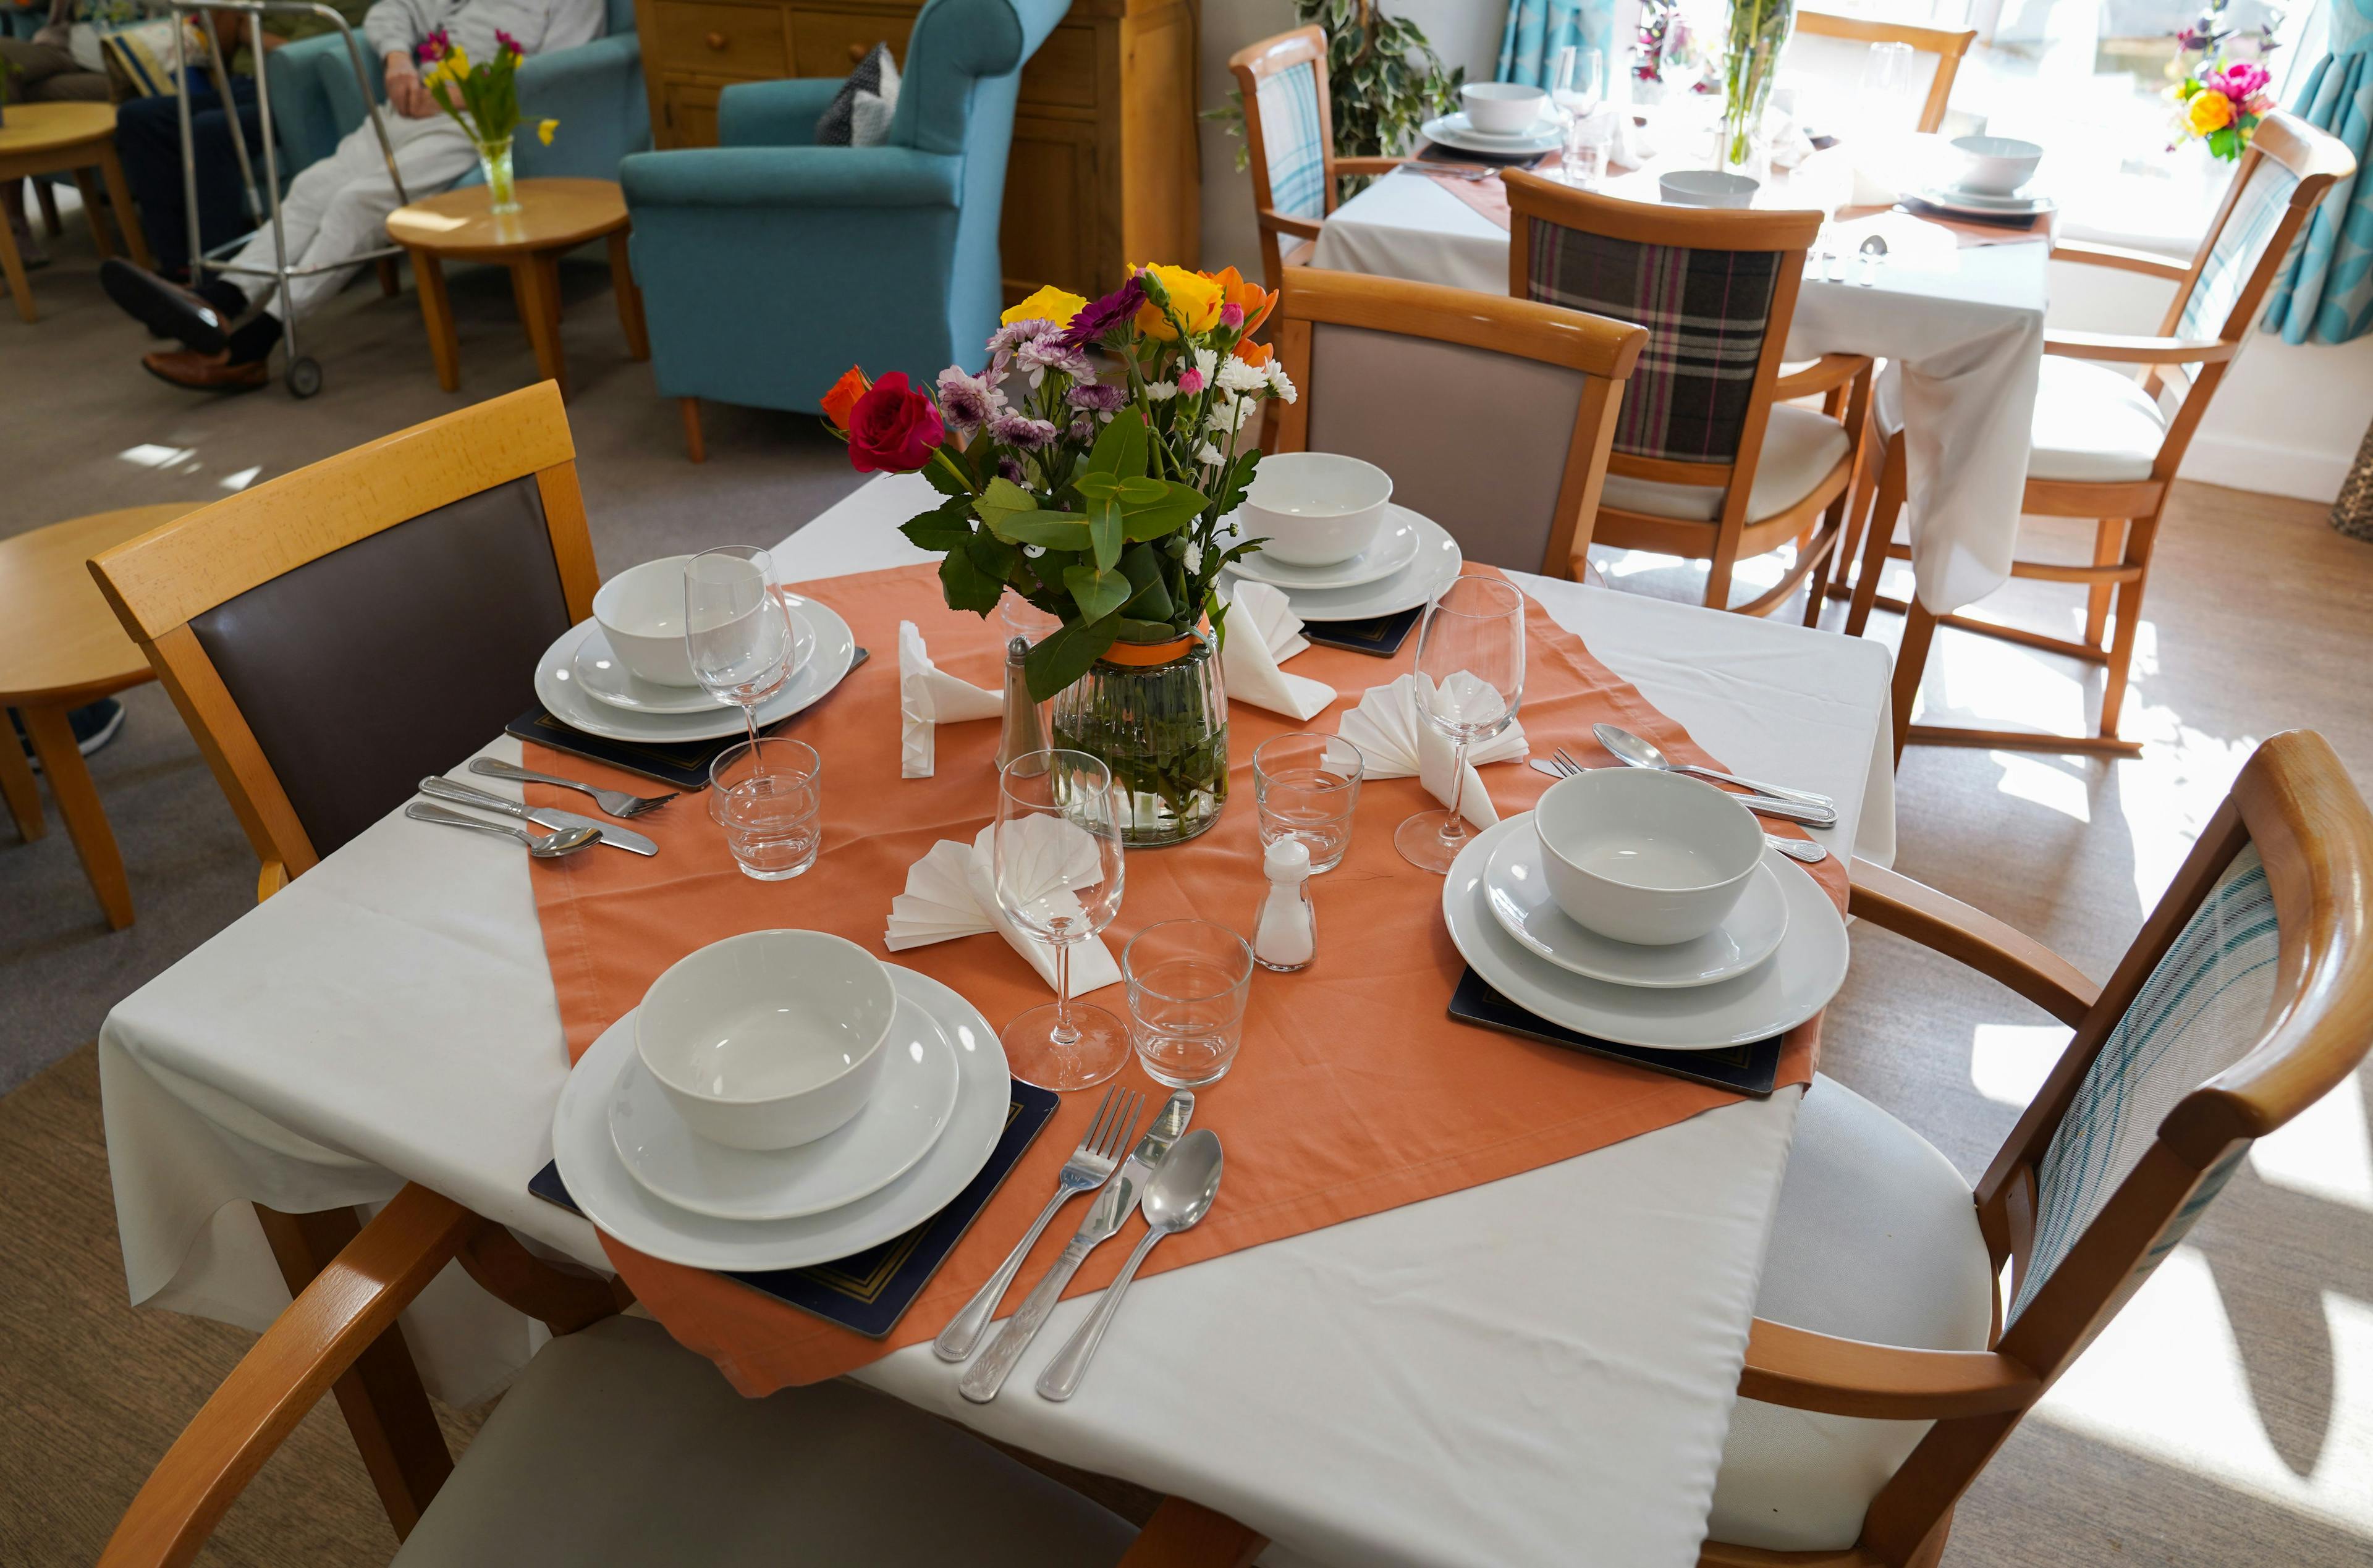 Dining Area at The Manse Residential Care Home, South Norwood, London